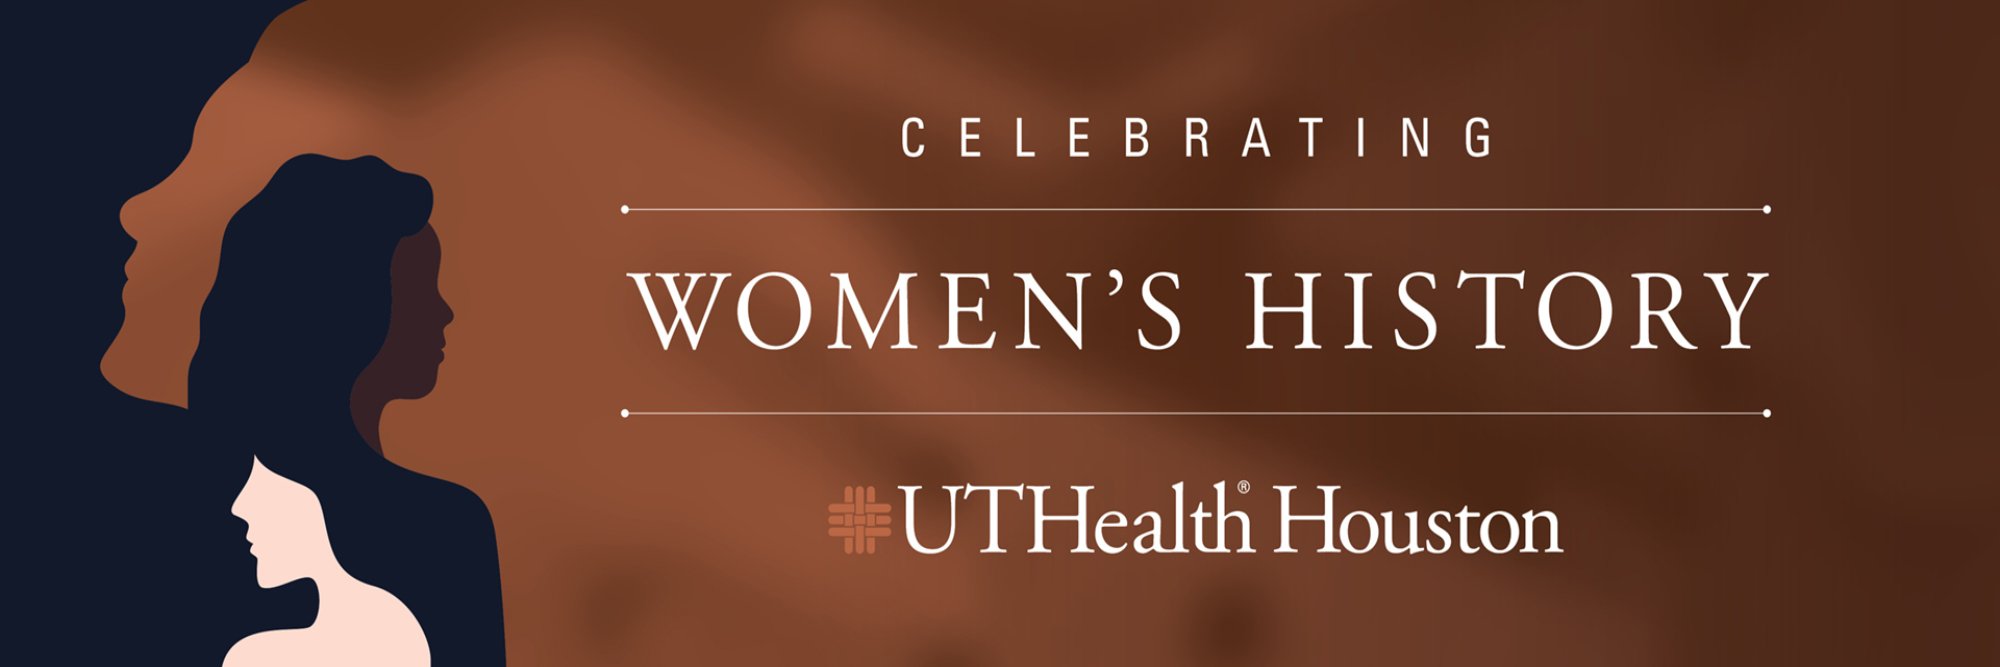 Banner image with a burnt orange background and silhouettes of women's faces with text that reads Celebrating Women's History